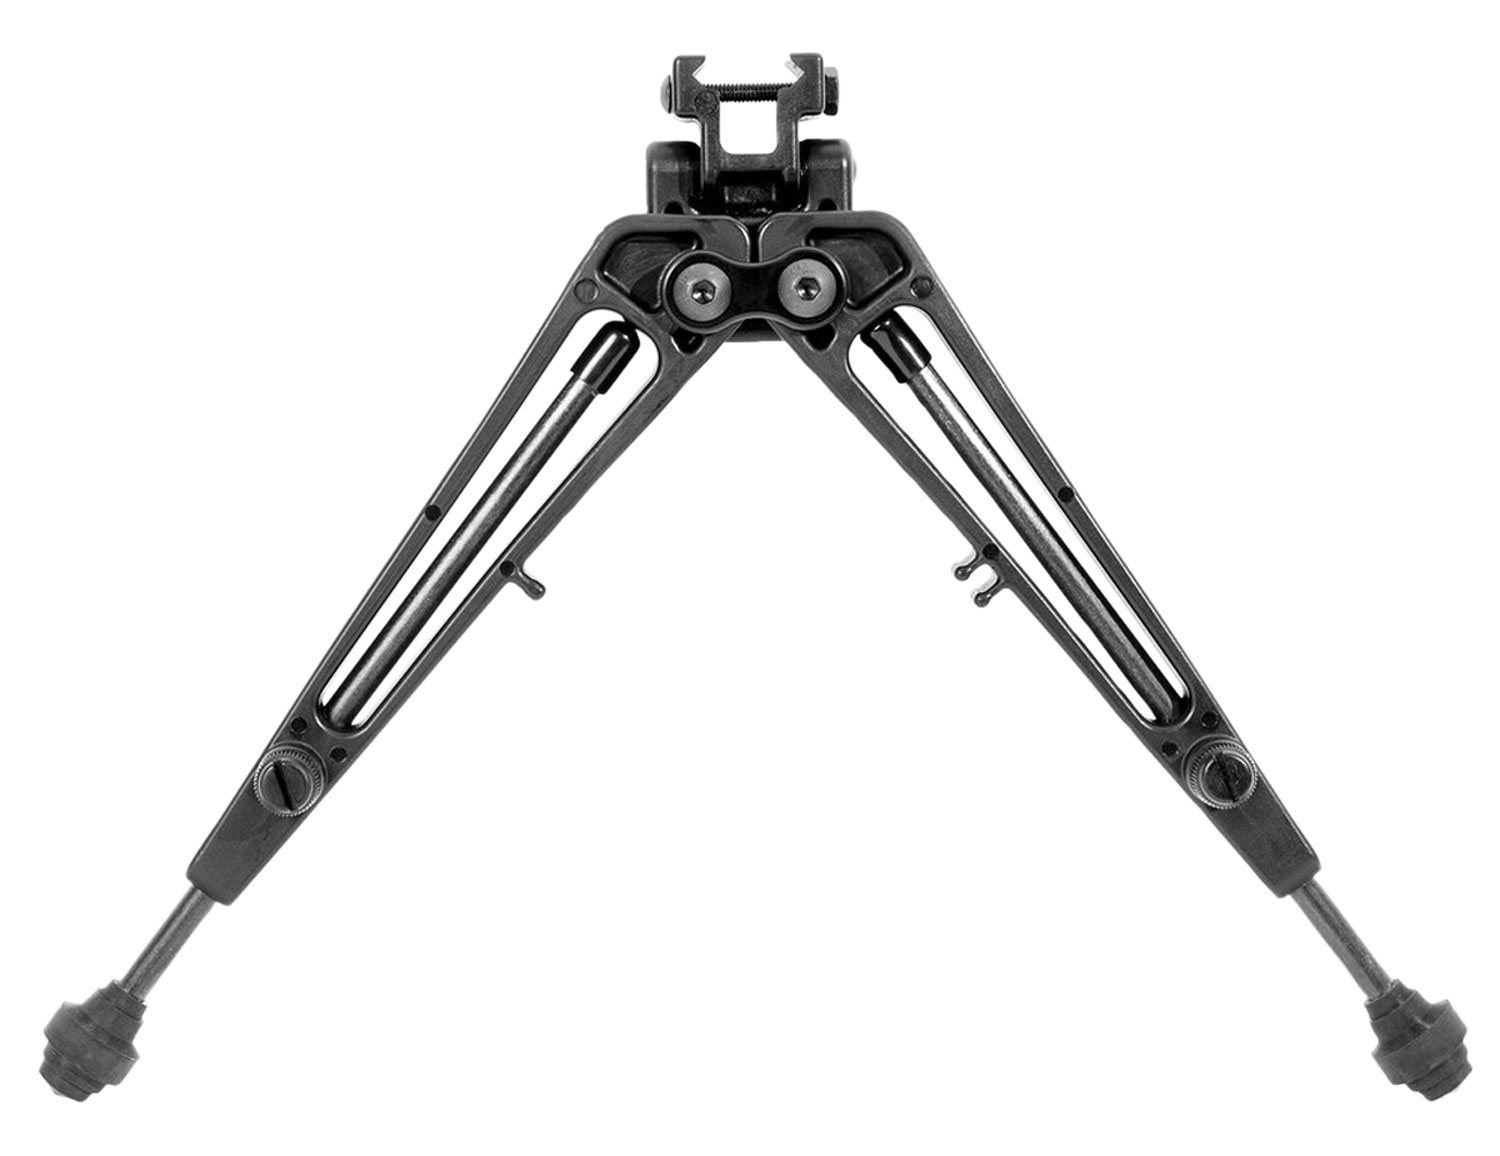 Limbsaver 12650 True-Track Bipod made of Durable Isoplast with Black Finish, Picatinny Rail Attachment, 7-11